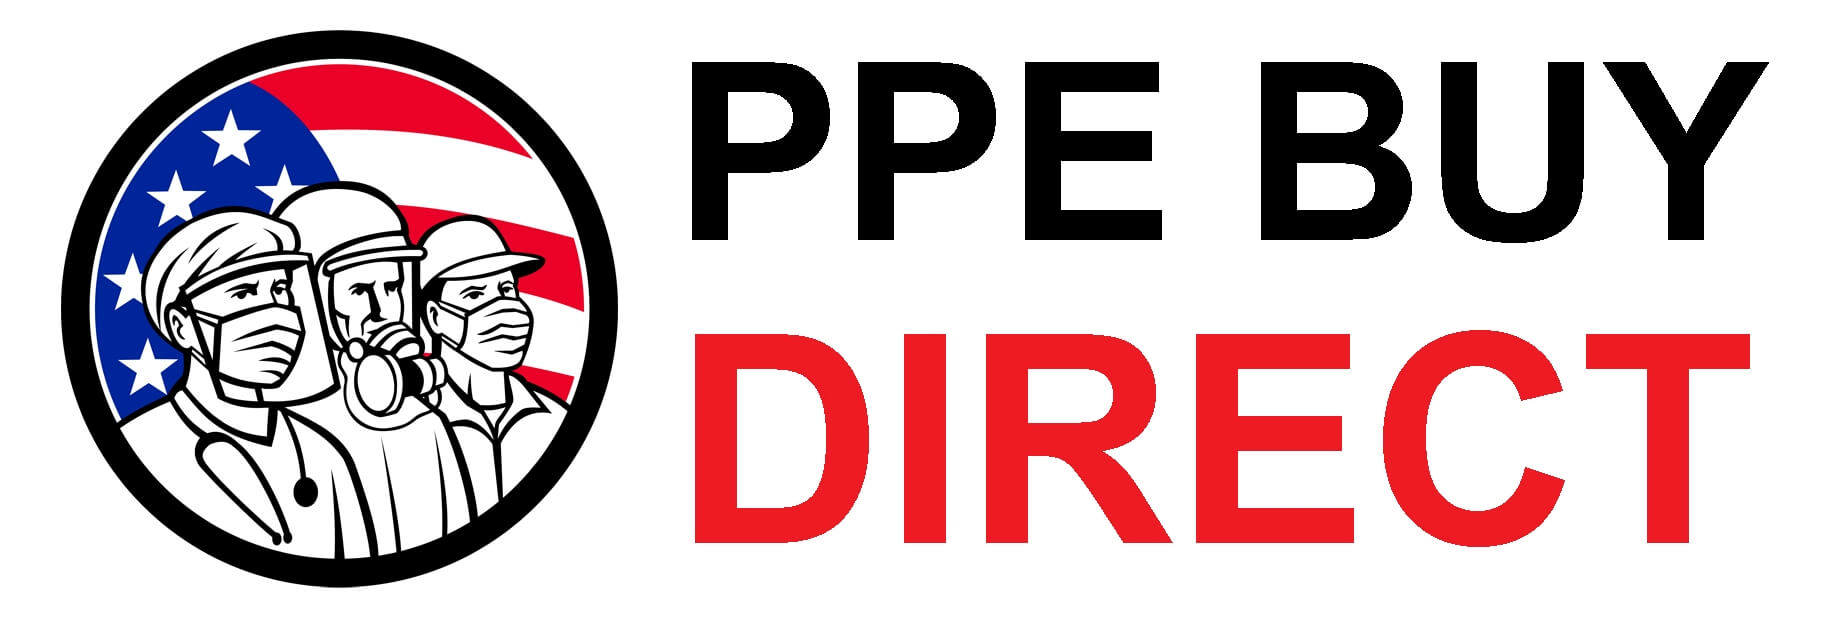 PPE Buy Direct